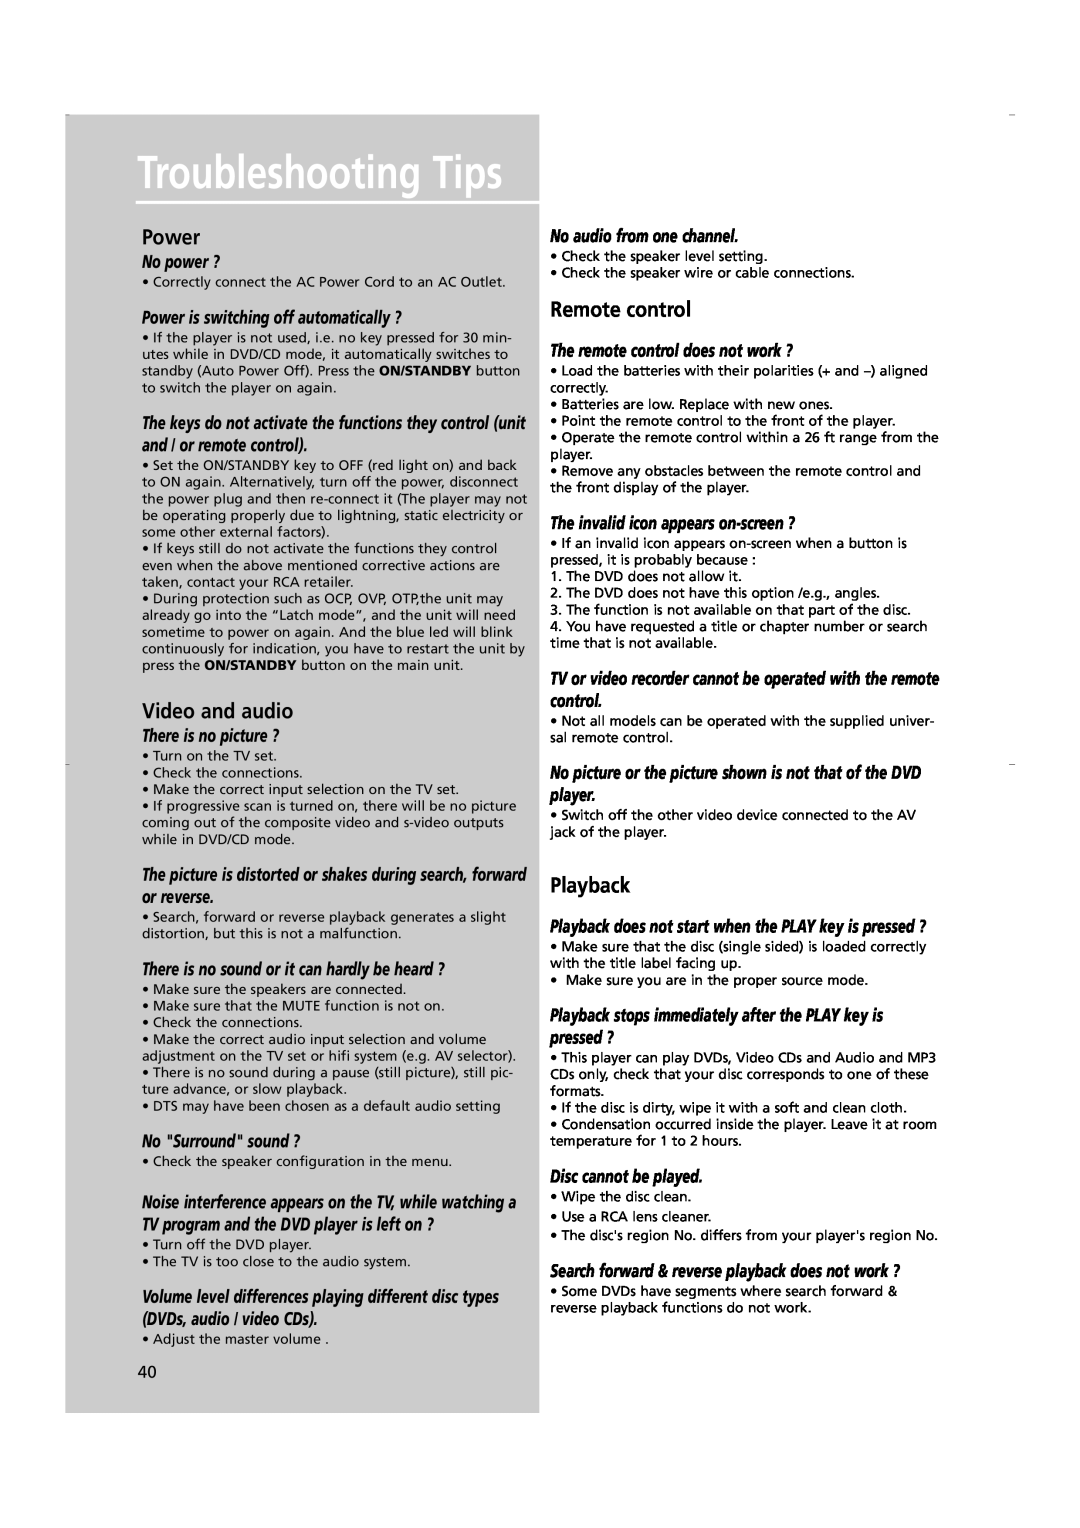 RCA RTD250 user manual Troubleshooting Tips, Power, Video and audio, Remote control, Playback 